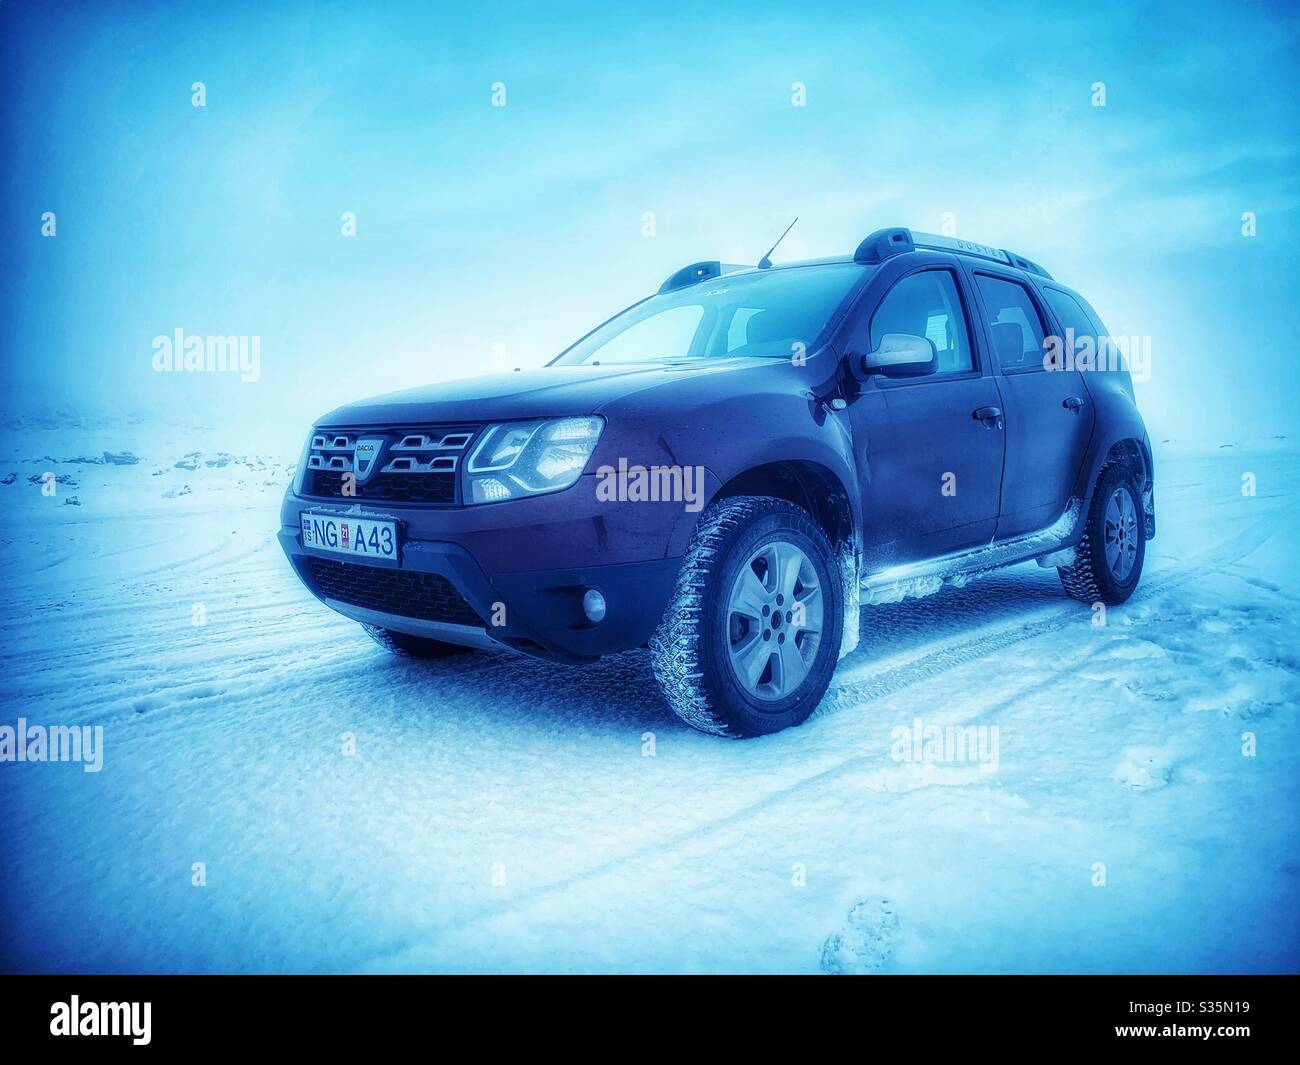 Dacia Duster: Romanian SUV facelifted for 2014 - Drive